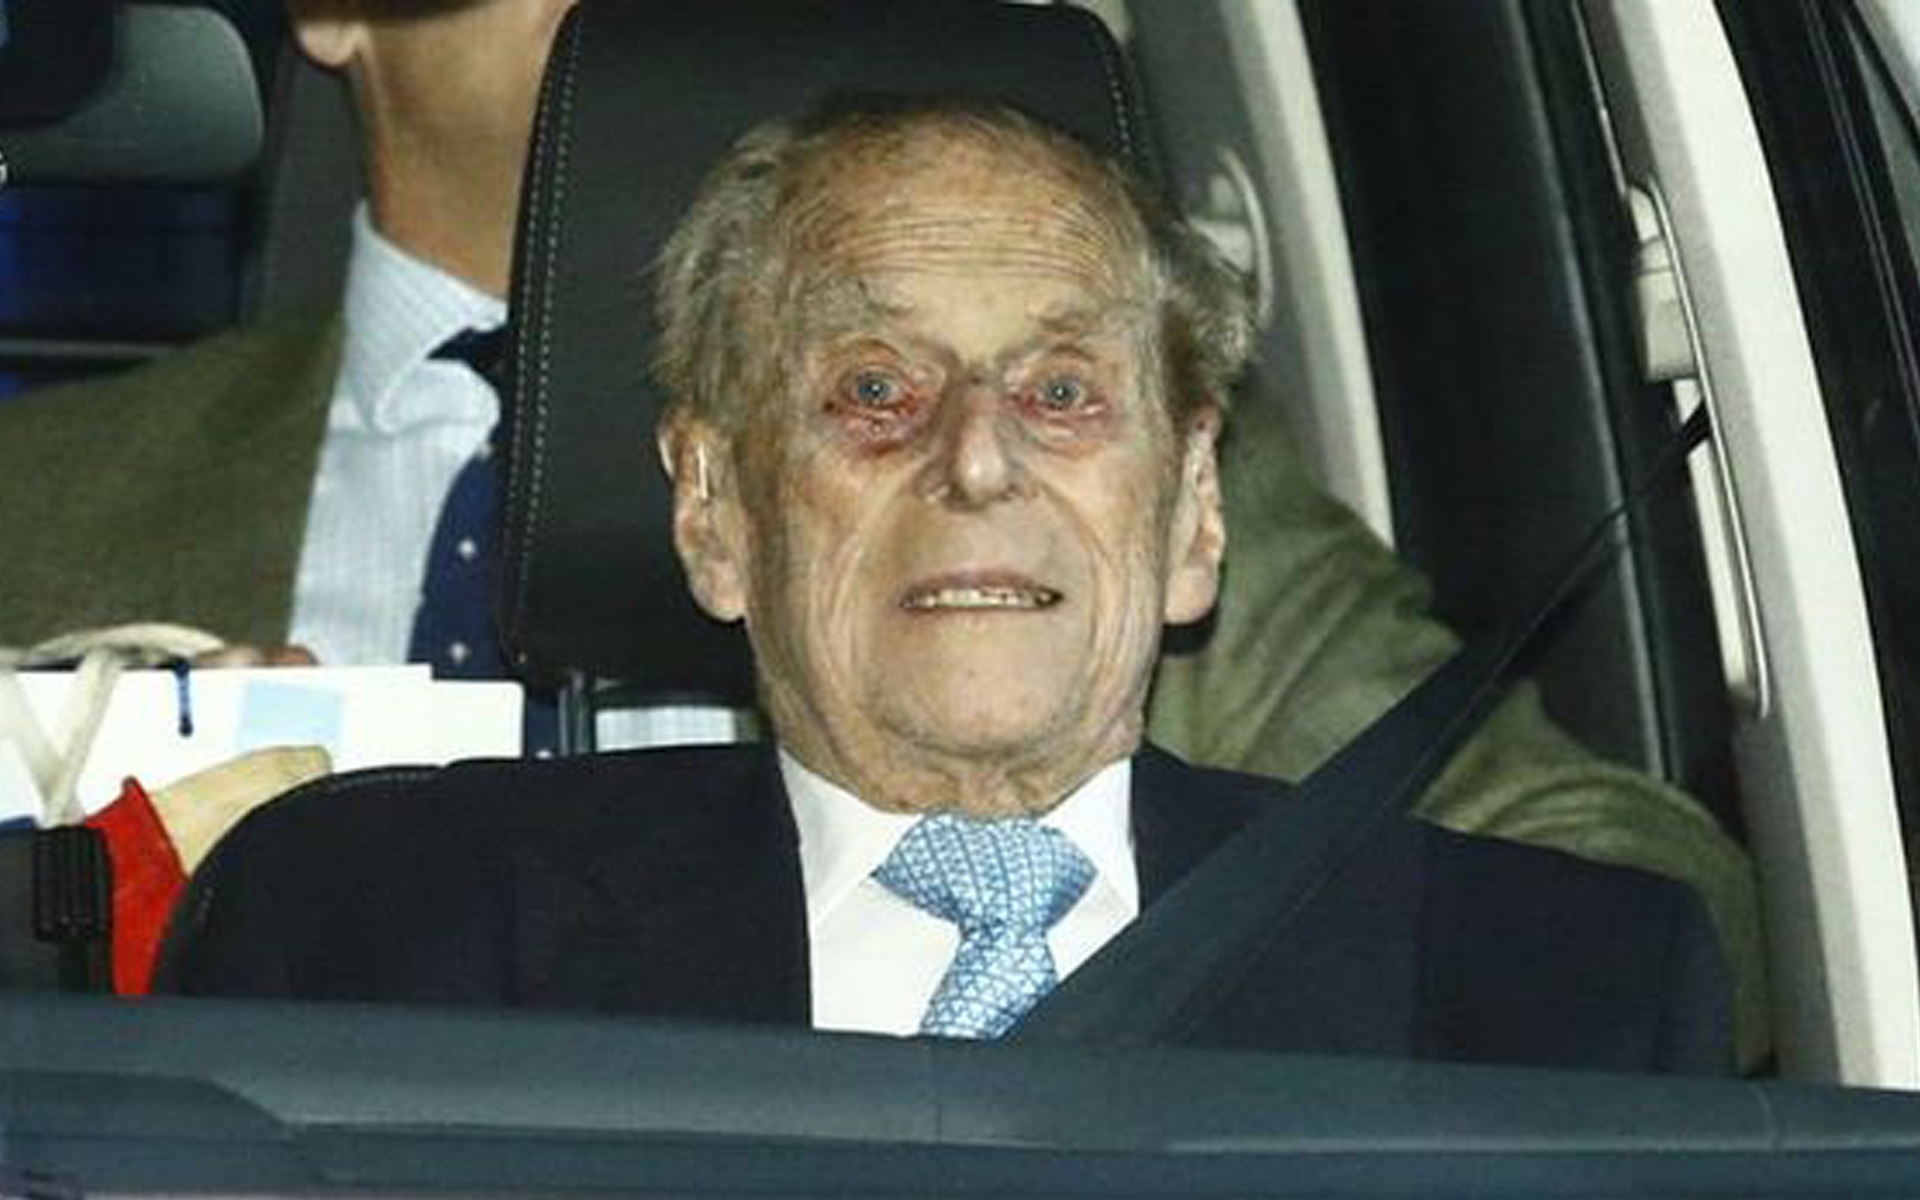 Prince Philip On Loose After Release From Hospital, First Bite Victim Comes Forward